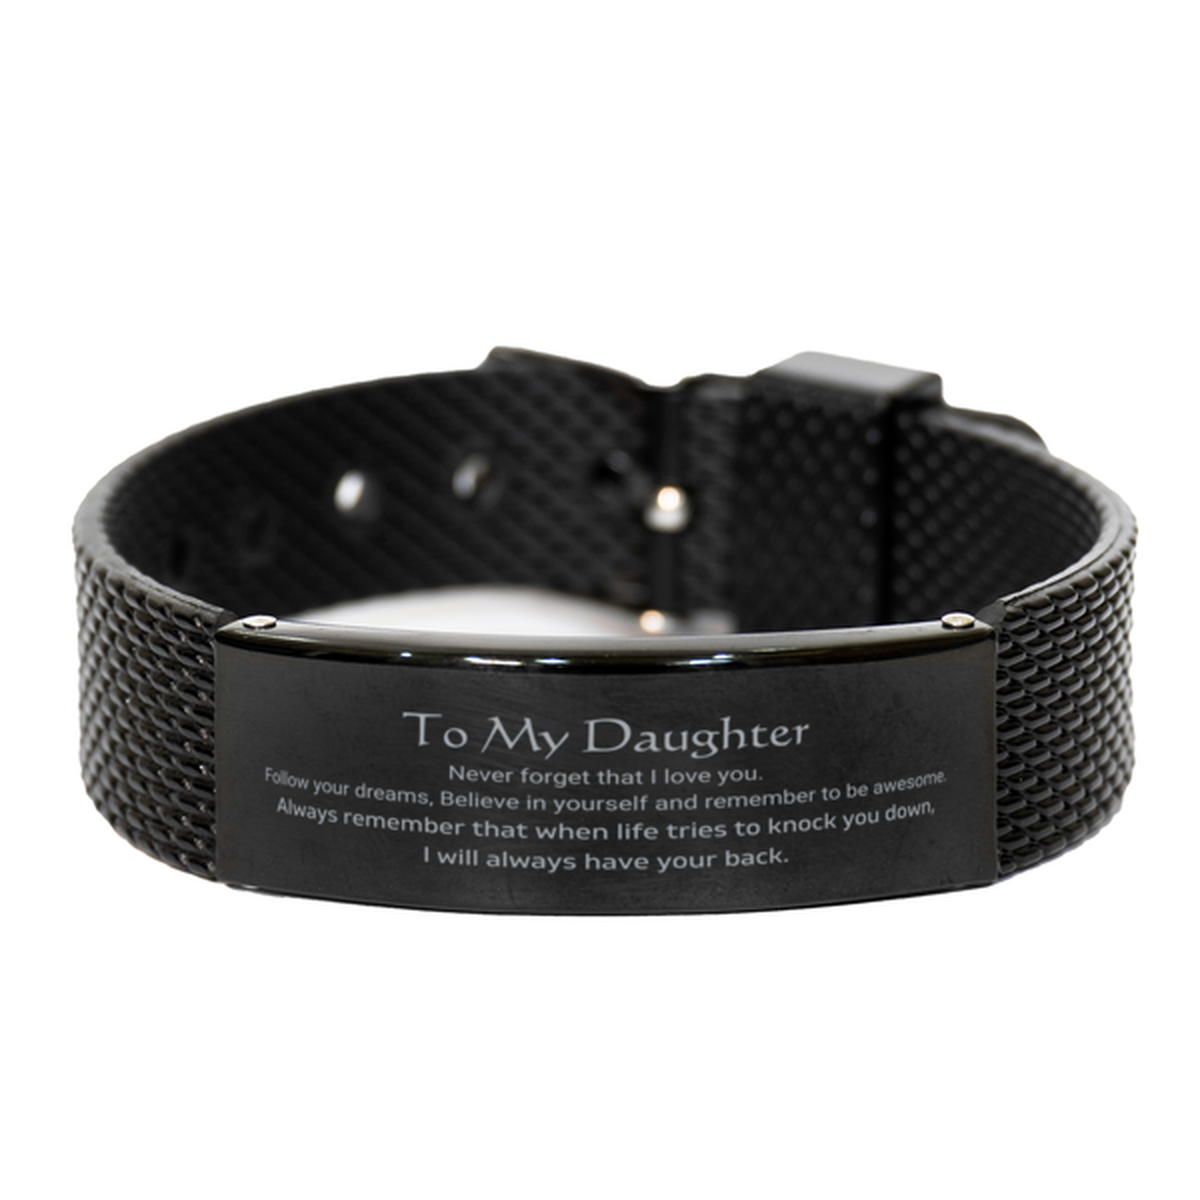 Inspirational Gifts for Daughter, Follow your dreams, Believe in yourself, Daughter Black Shark Mesh Bracelet, Birthday Christmas Unique Gifts For Daughter